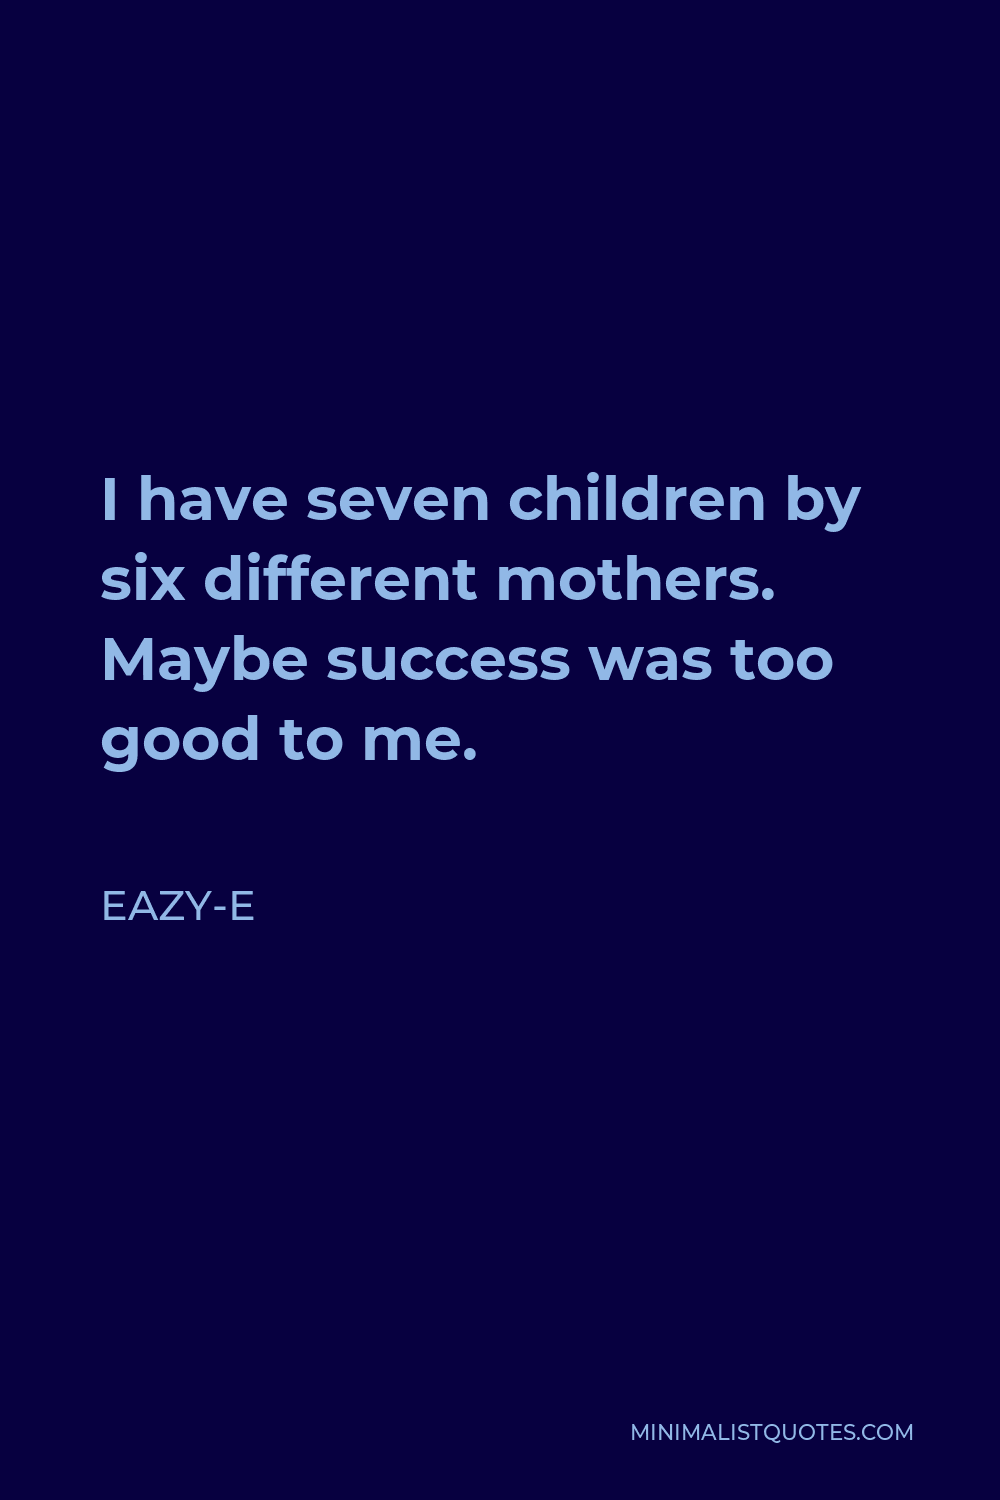 Eazy-E Quote - I have seven children by six different mothers. Maybe success was too good to me.